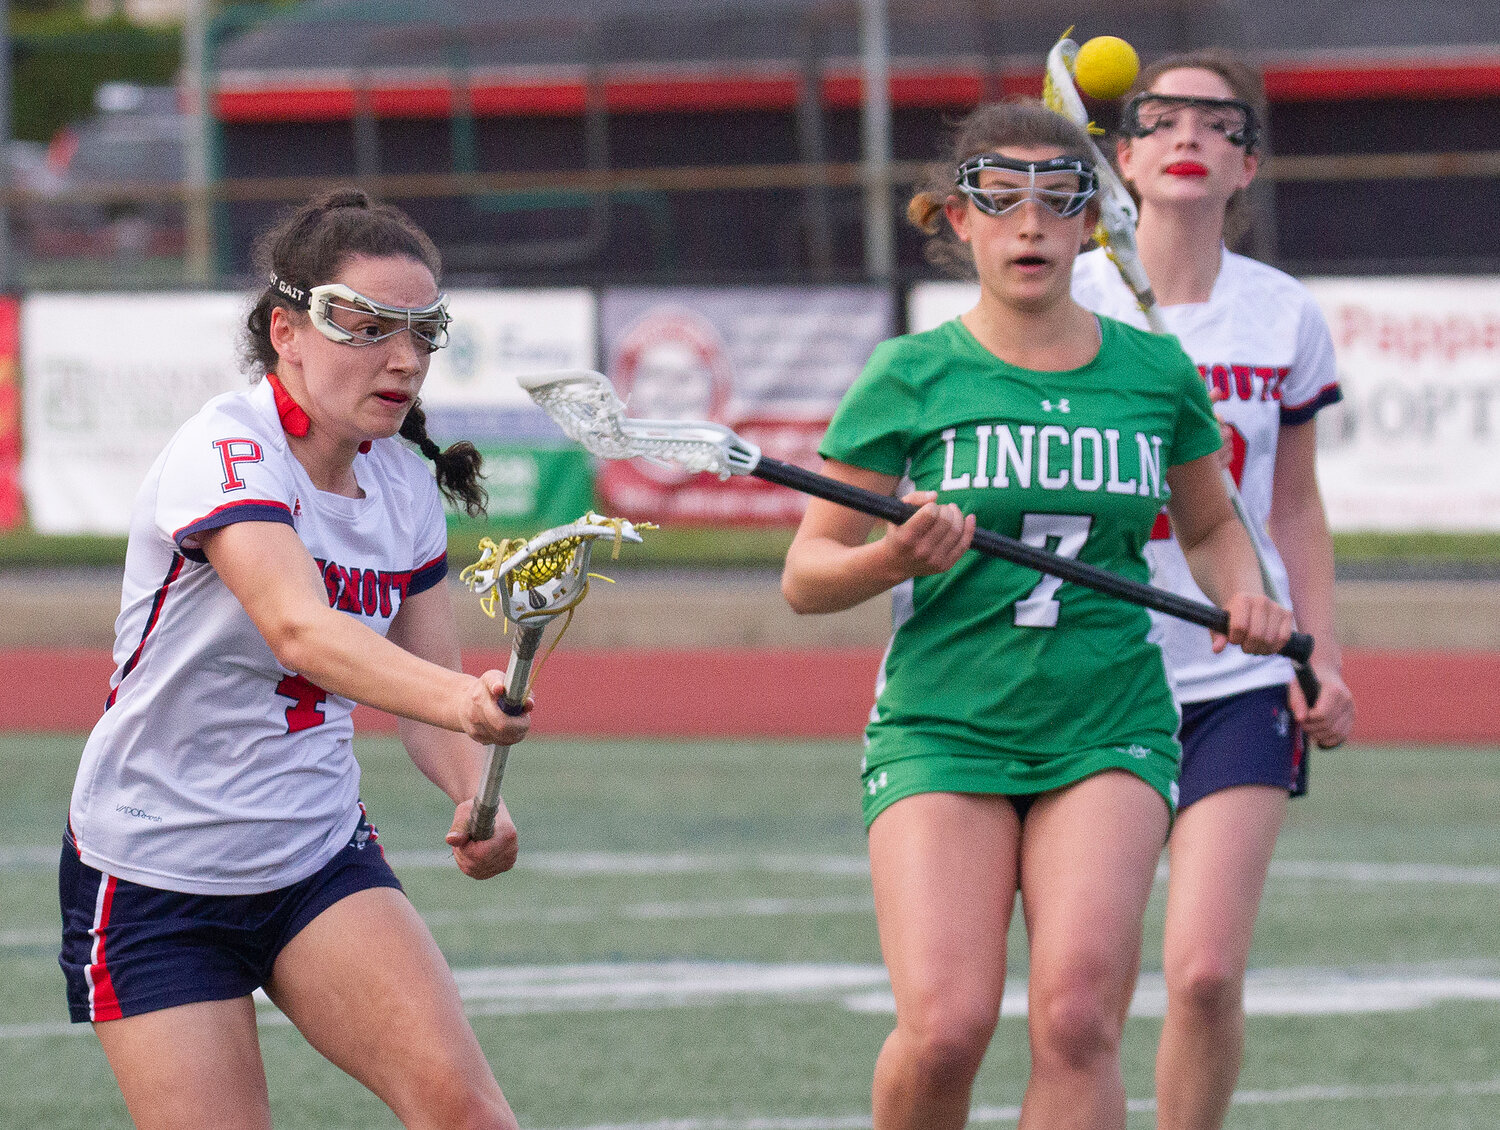 Elizabeth Skeels shoots and scores a goal for the Patriots during their semifinals win over the Lincoln School.